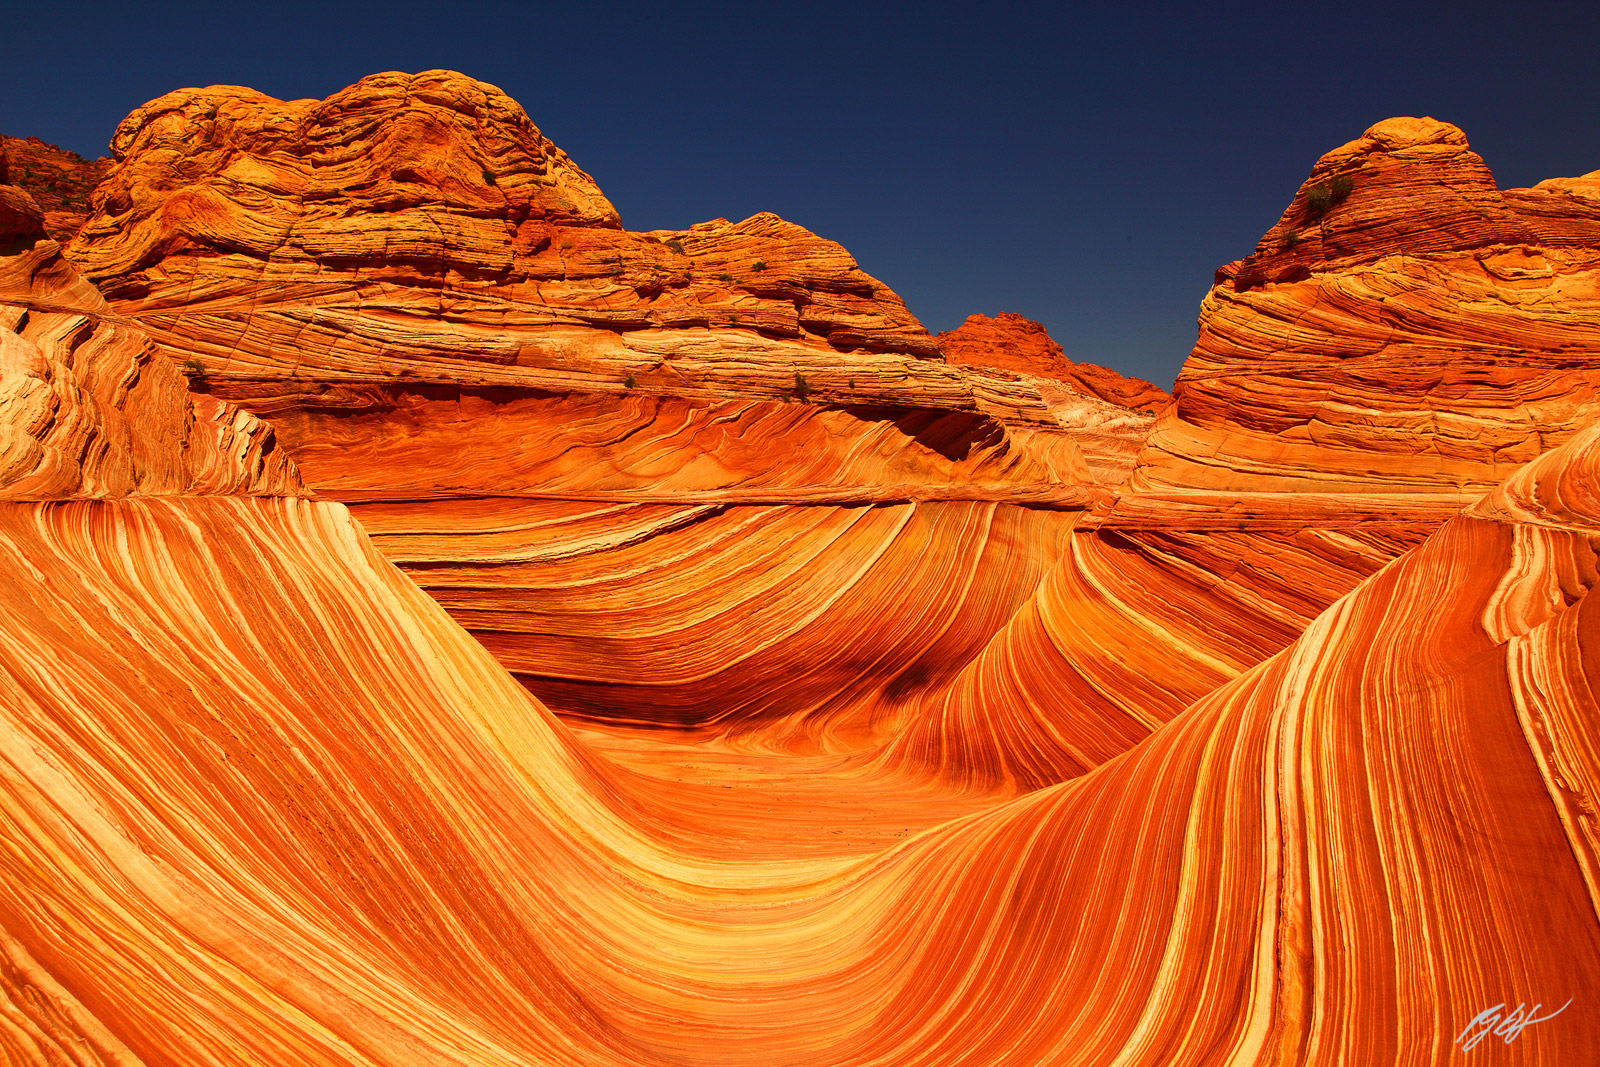 The Wave in Coyote Buttes North in the Vermillion Cliffs Wilderness in Arizona